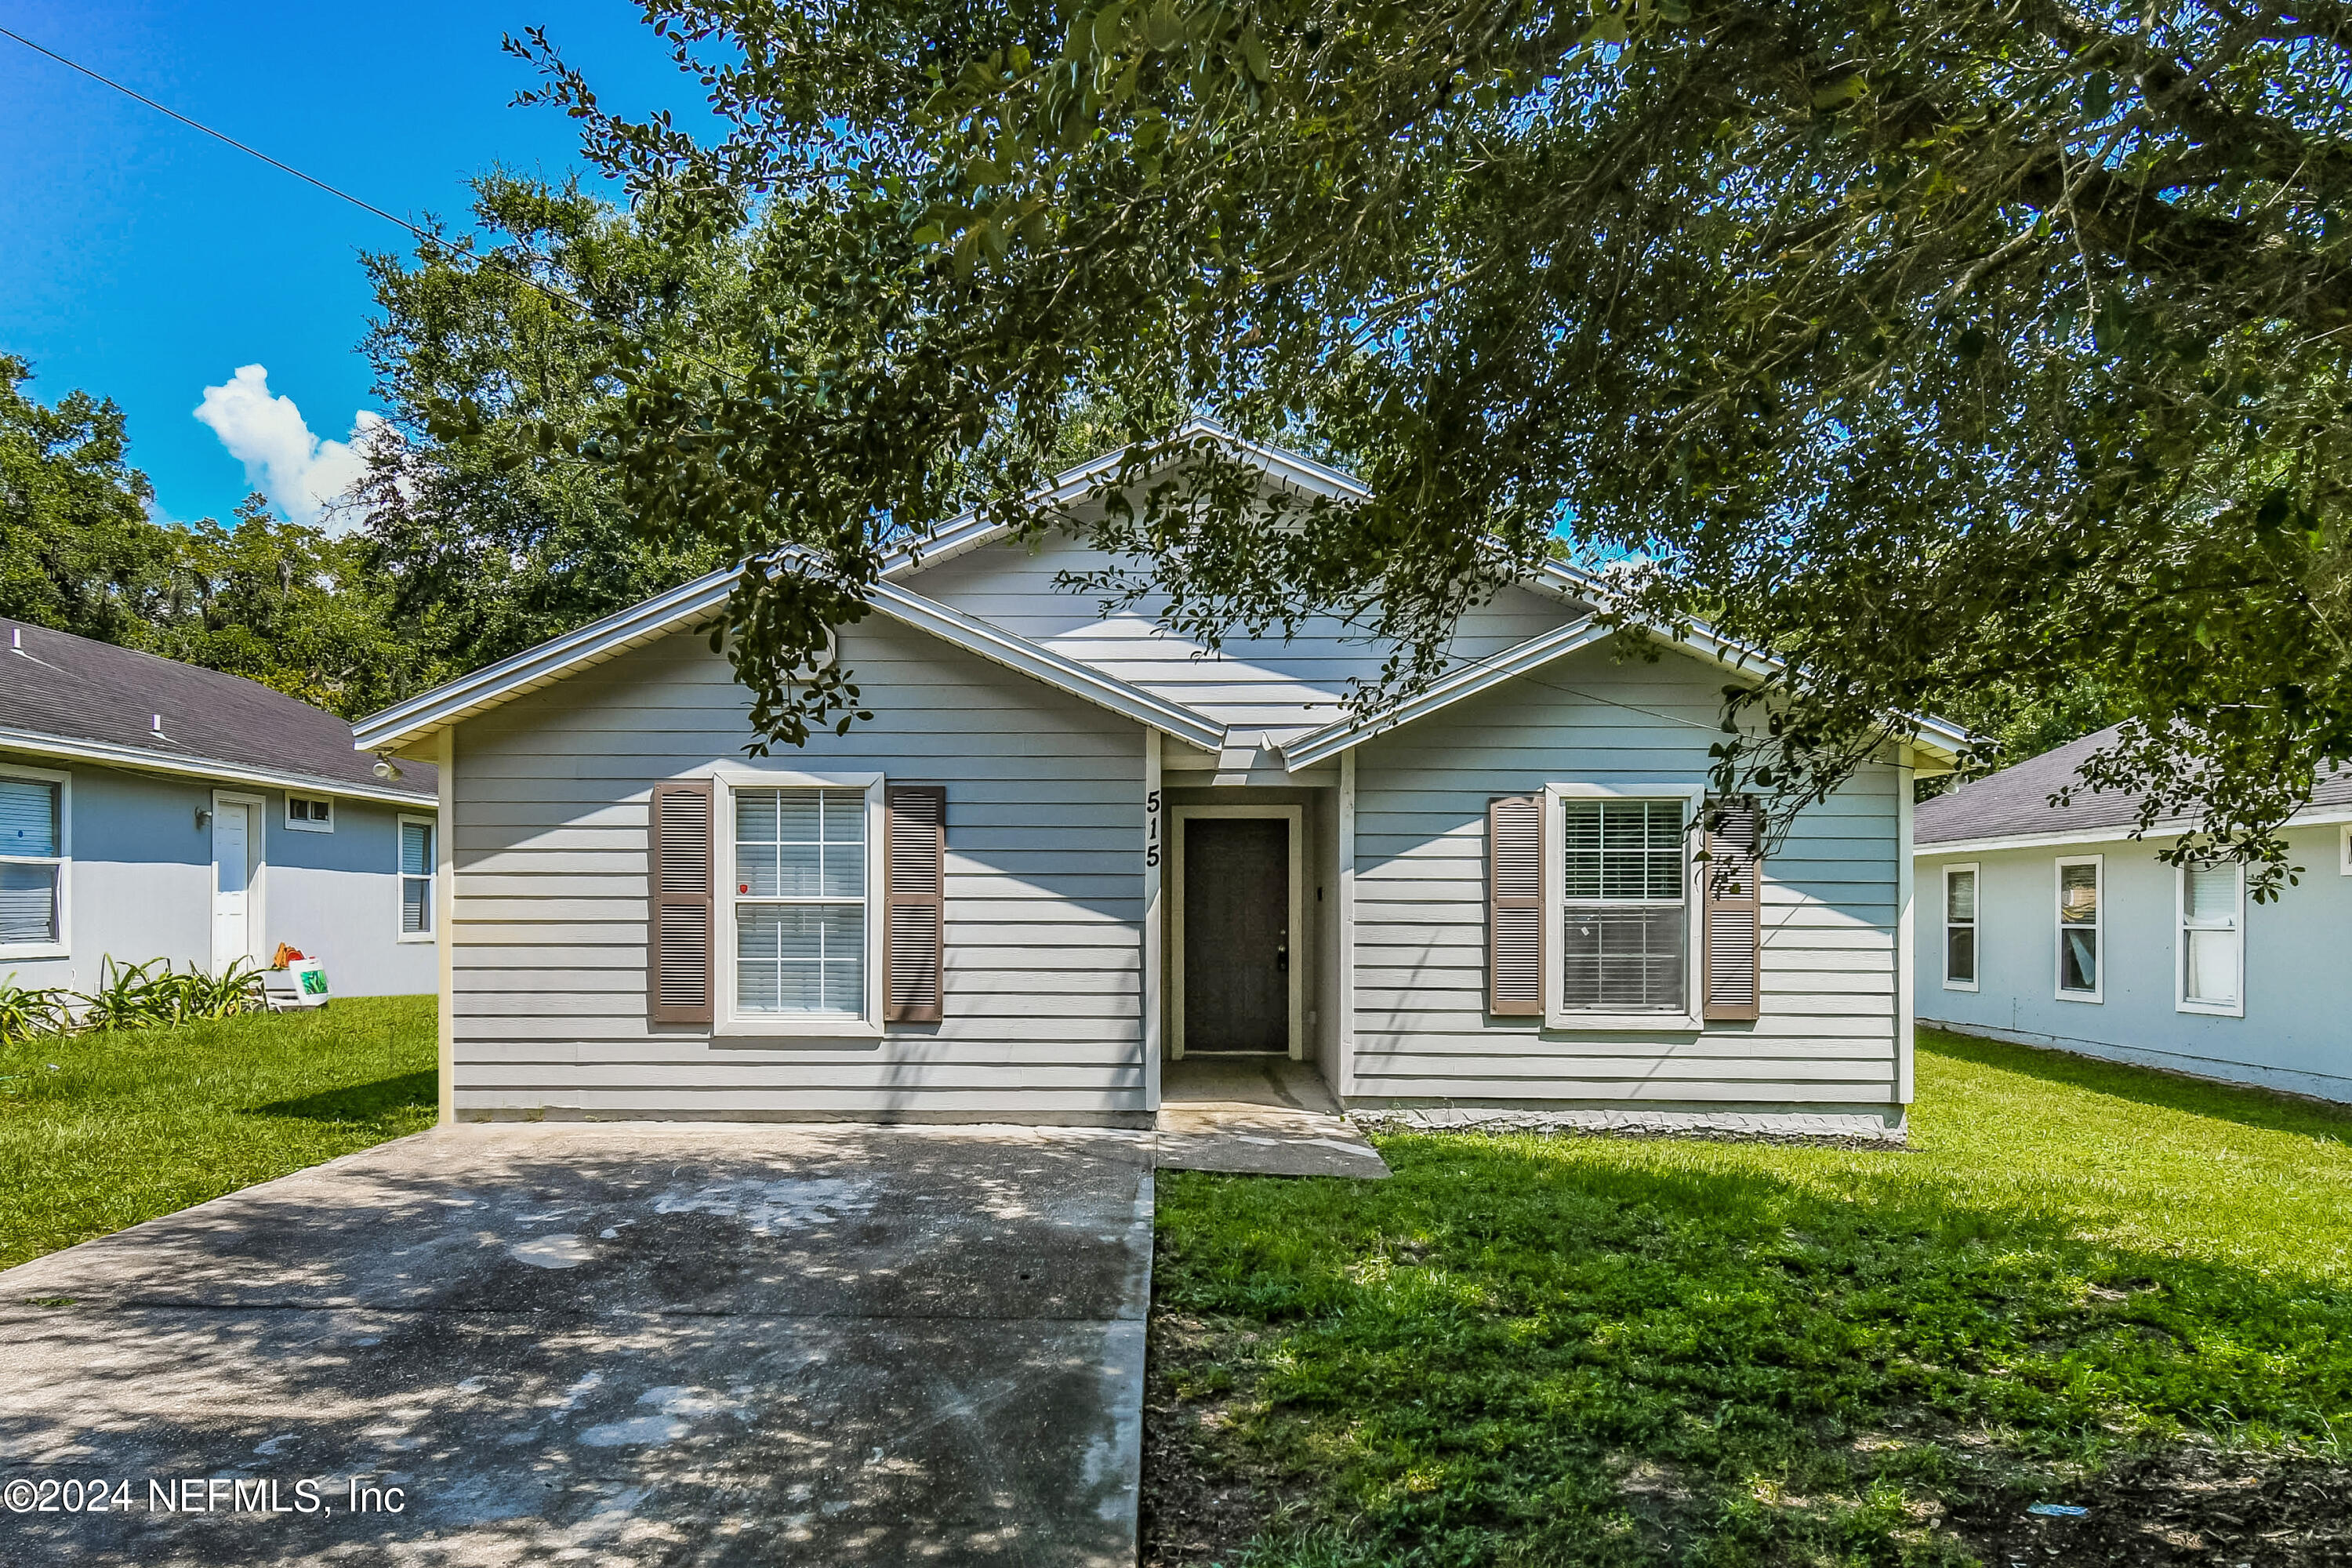 Jacksonville, FL home for sale located at 515 E 55th Street, Jacksonville, FL 32208